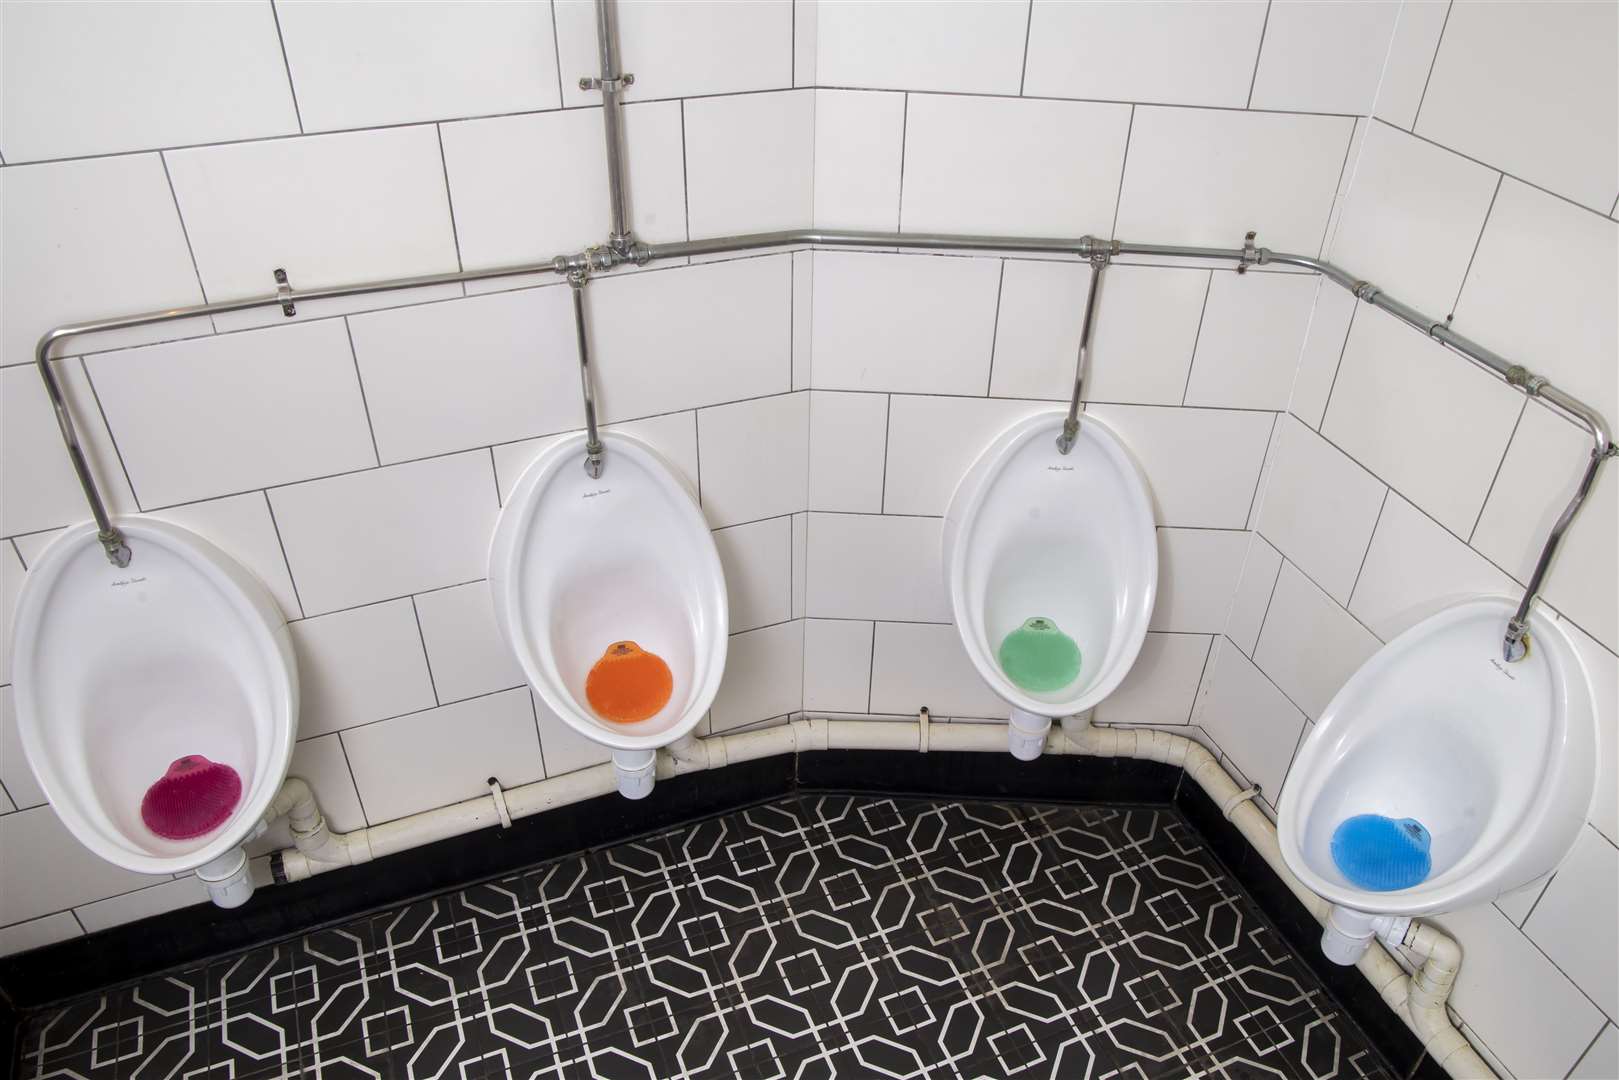 The mats sit inside urinals so men can read the message as they pee (NHS England/PA)